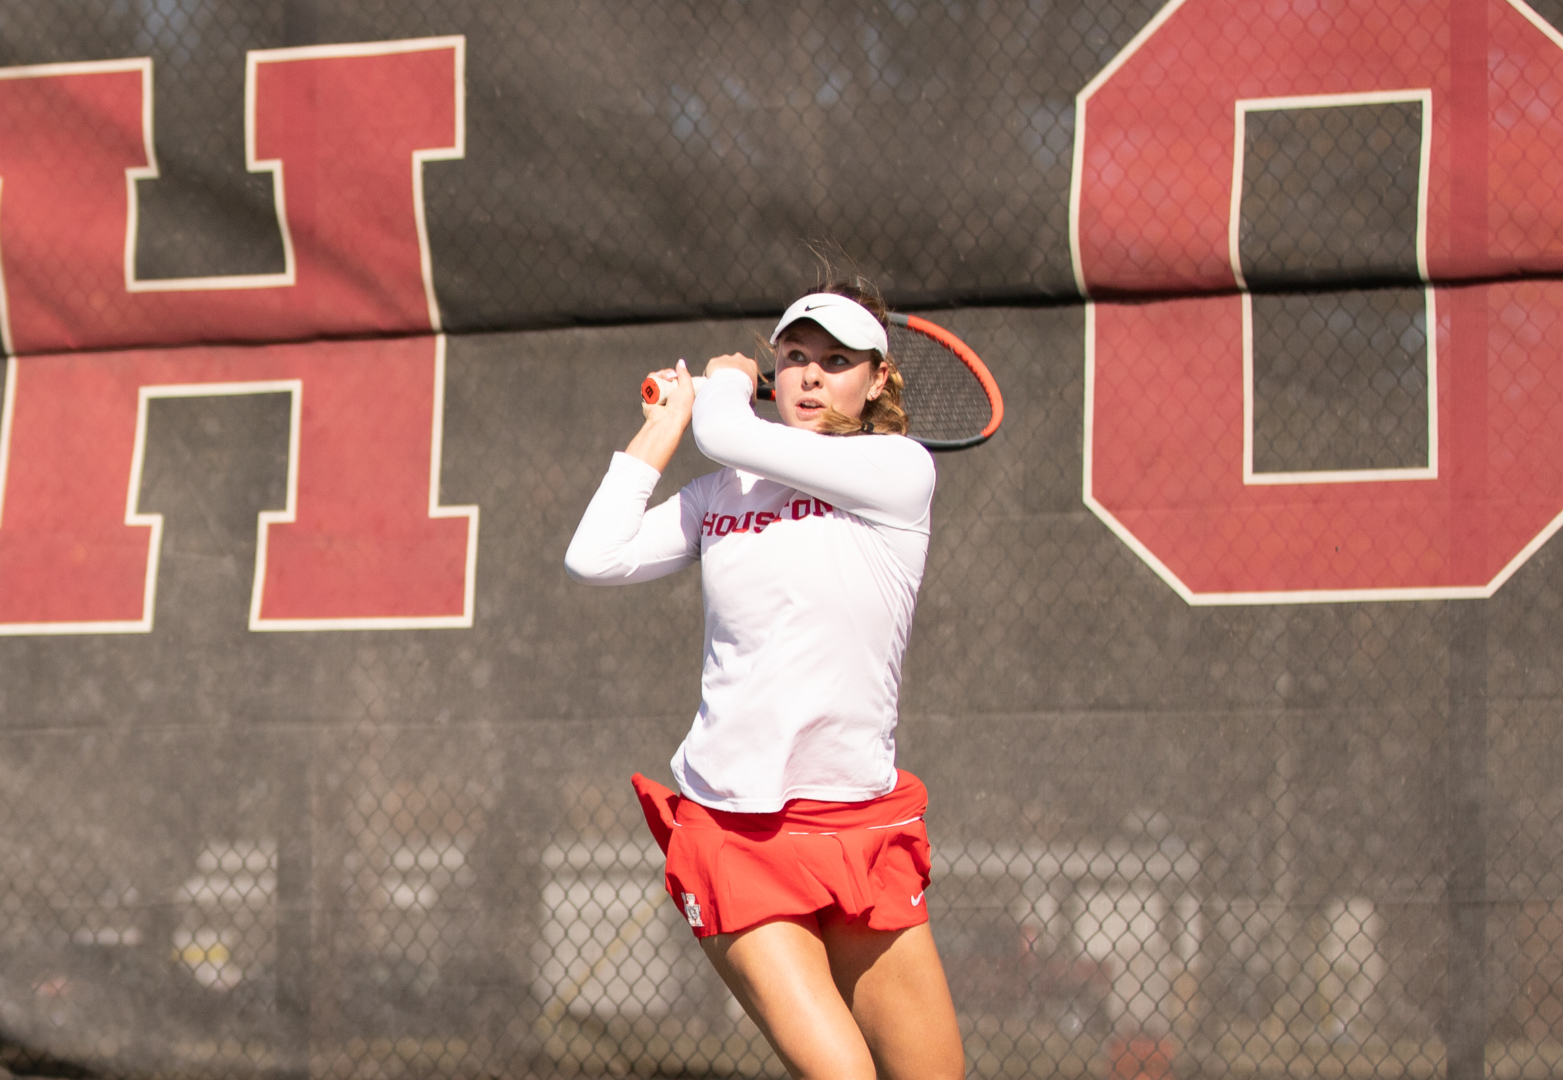 UH Tennis struggled in the season opener against Texas A&M in College Station after failing to win a single match on the day. | Gerald Sastra/The Cougar